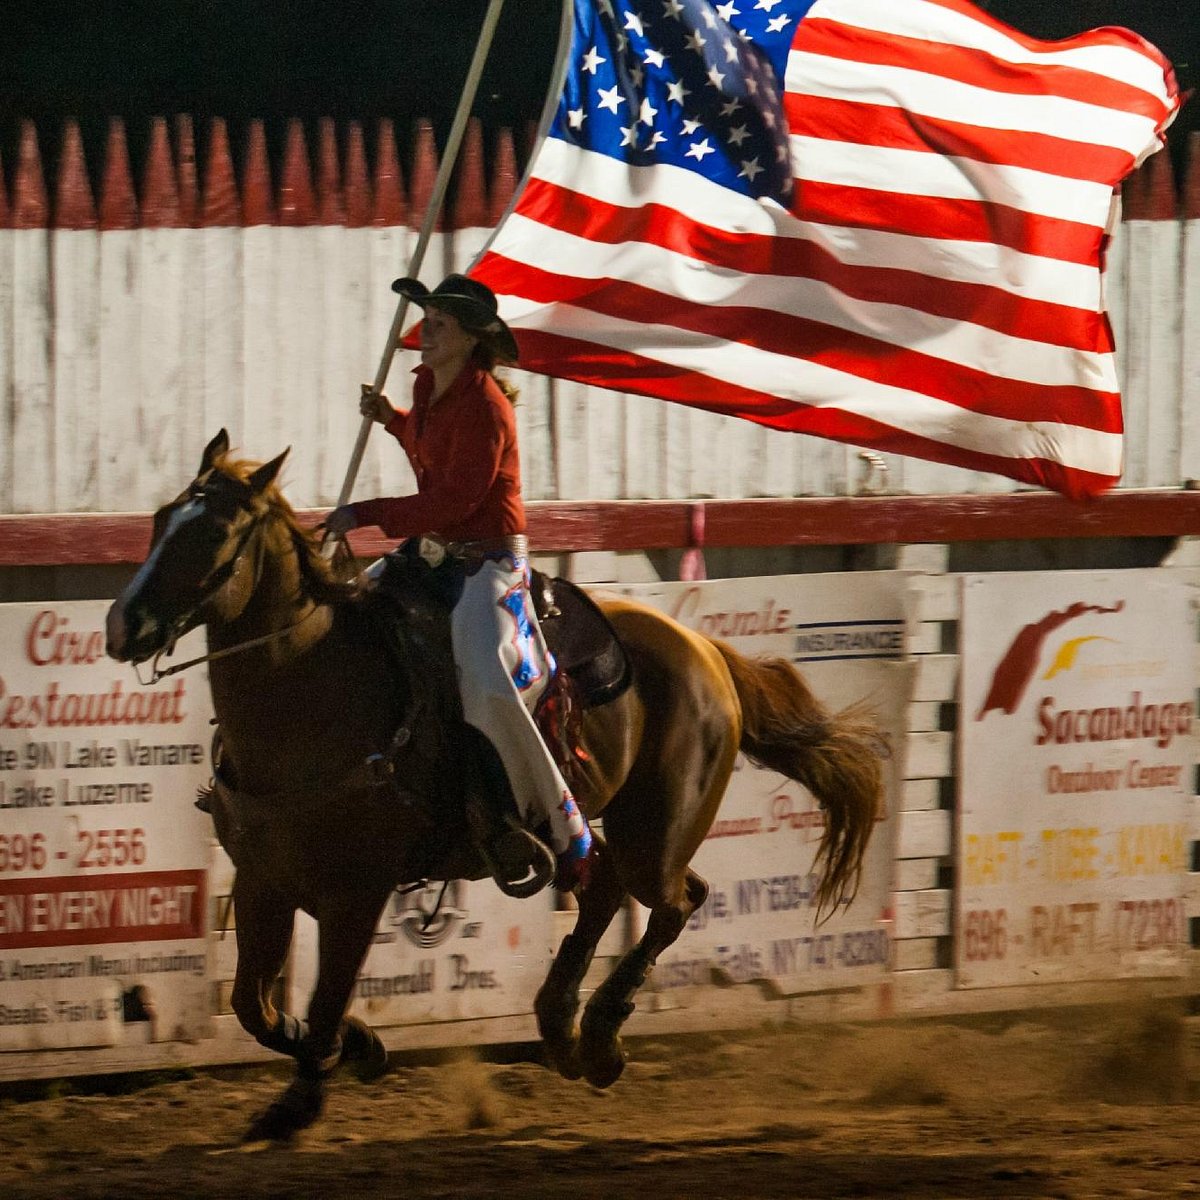 Painted Pony Championship Rodeo (Lake Luzerne) All You Need to Know